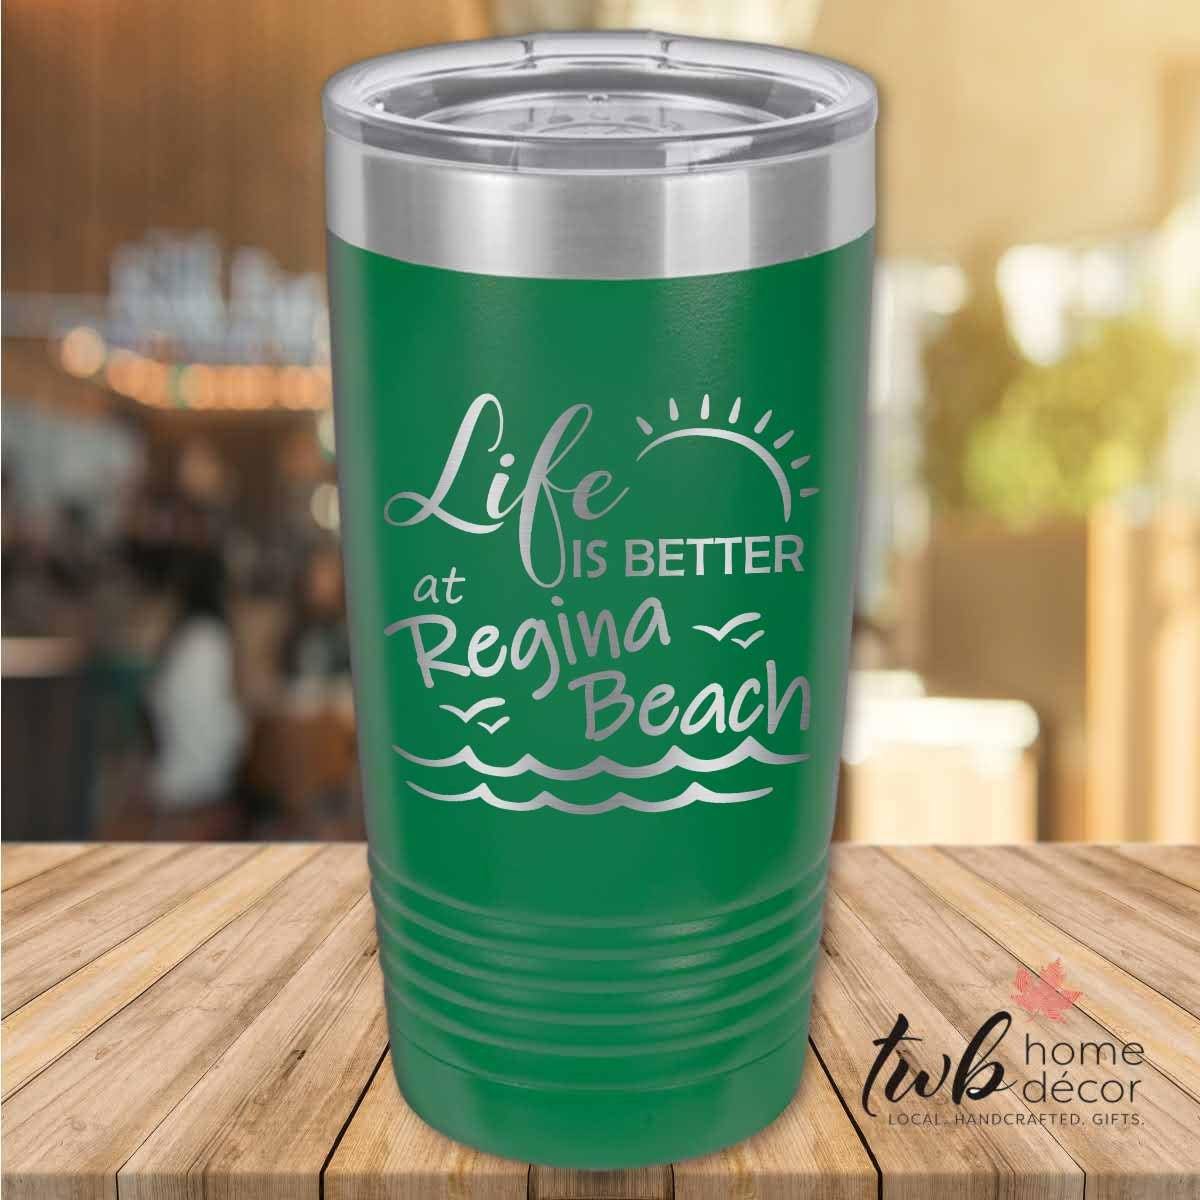 Life is Better at Regina Beach Thermal - TWB Home Decor